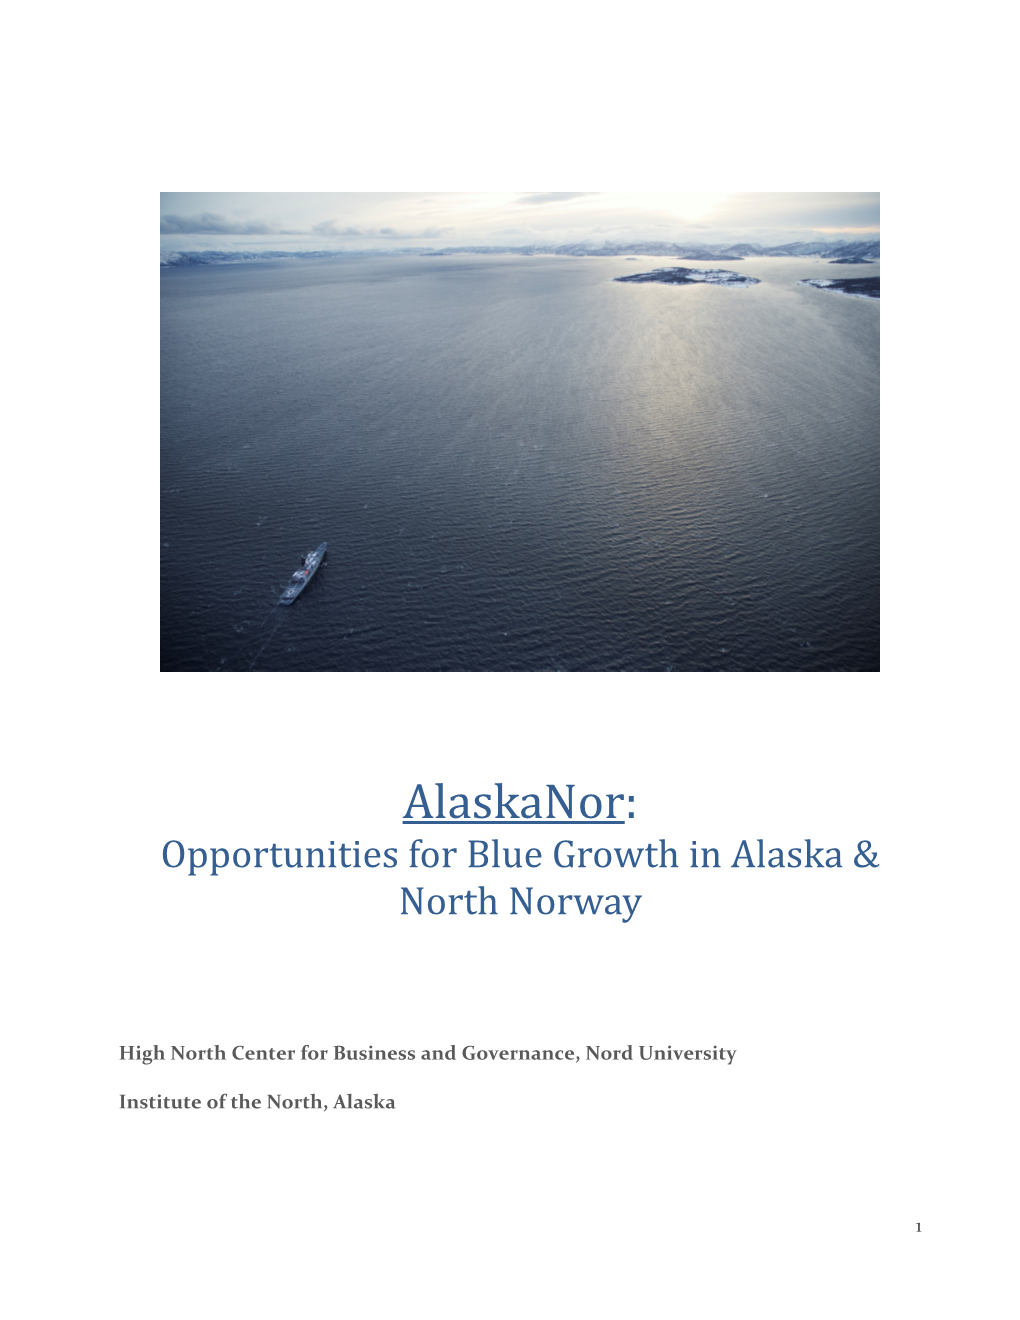 Alaskanor: Opportunities for Blue Growth in Alaska & North Norway